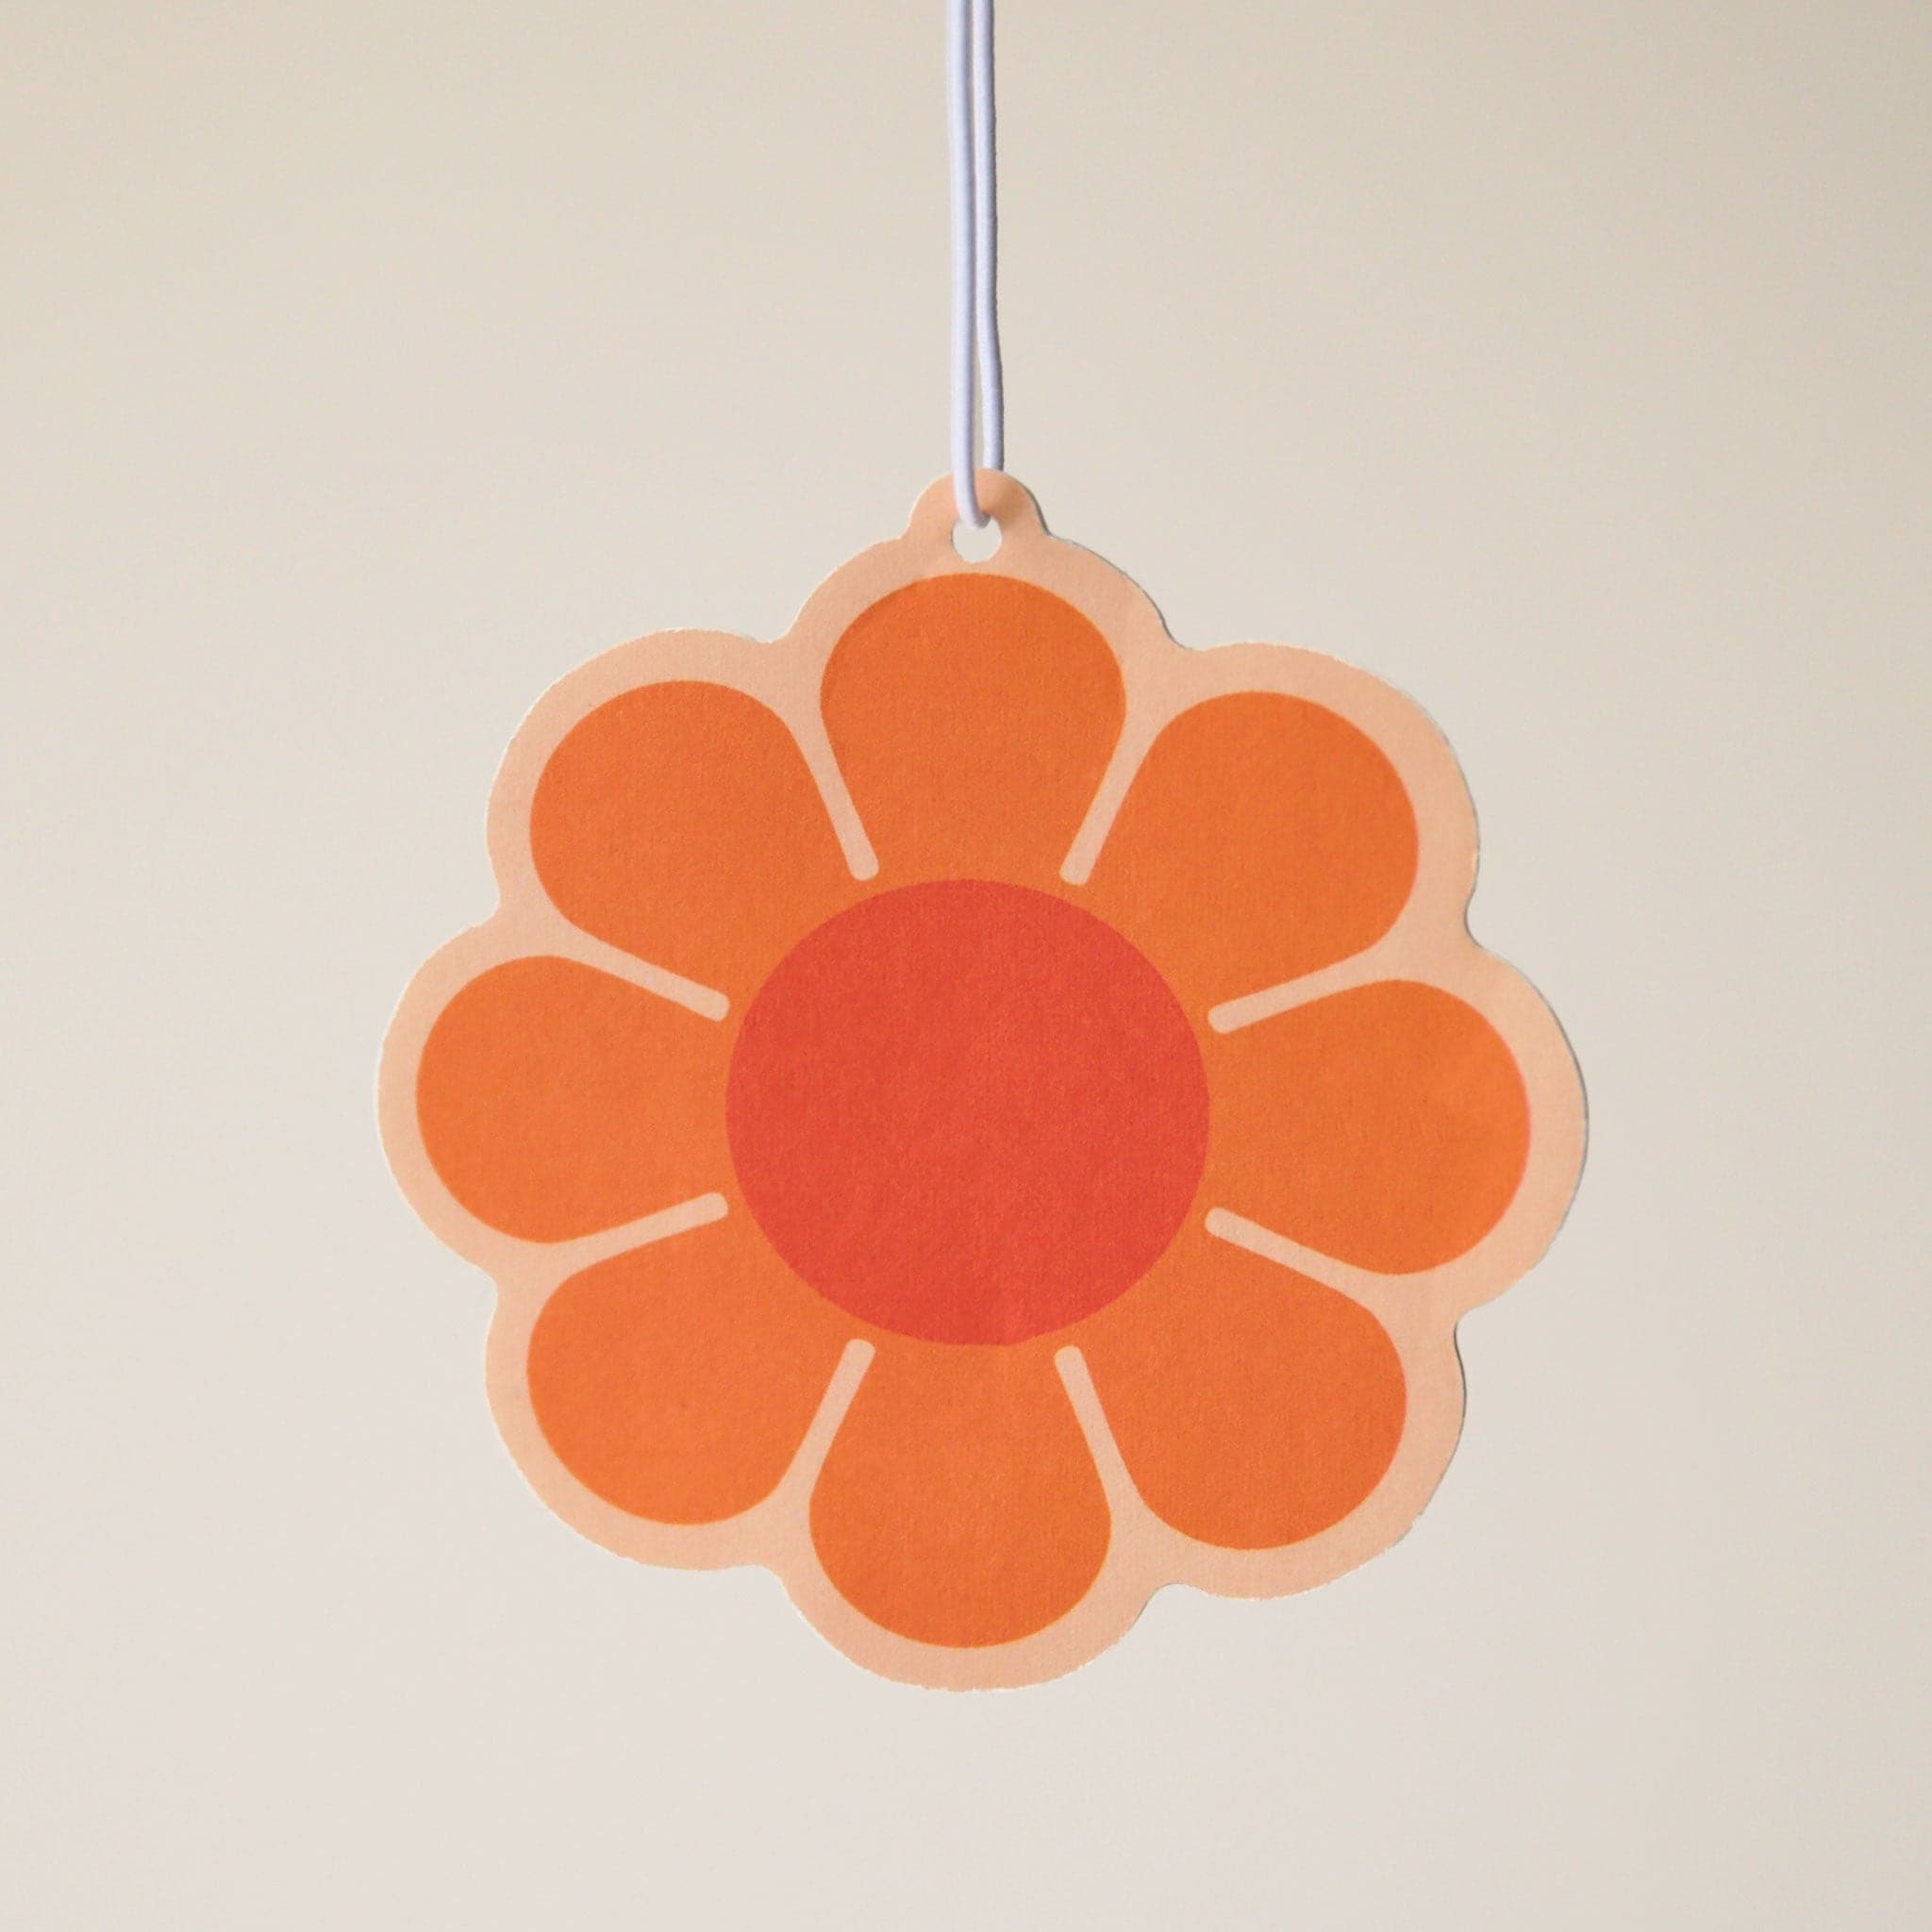 An orange 70's style daisy with a burnt red center.